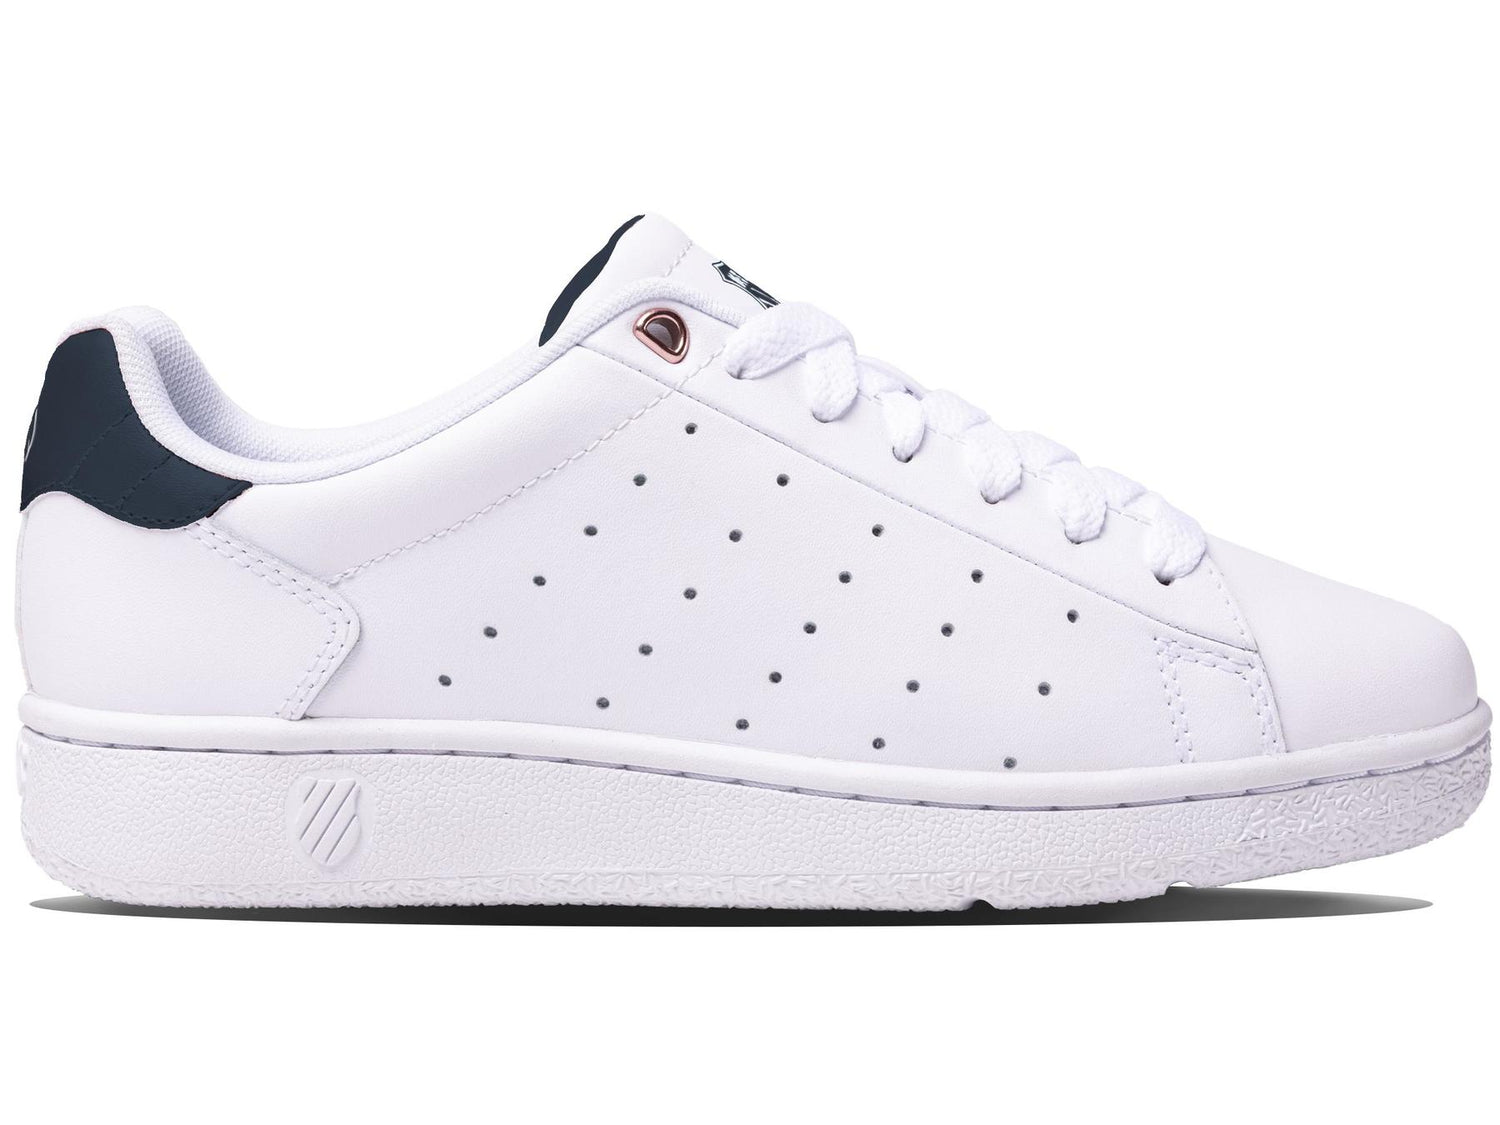 K-Swiss Men's Classic PF Court Shoes in White/Peacoat